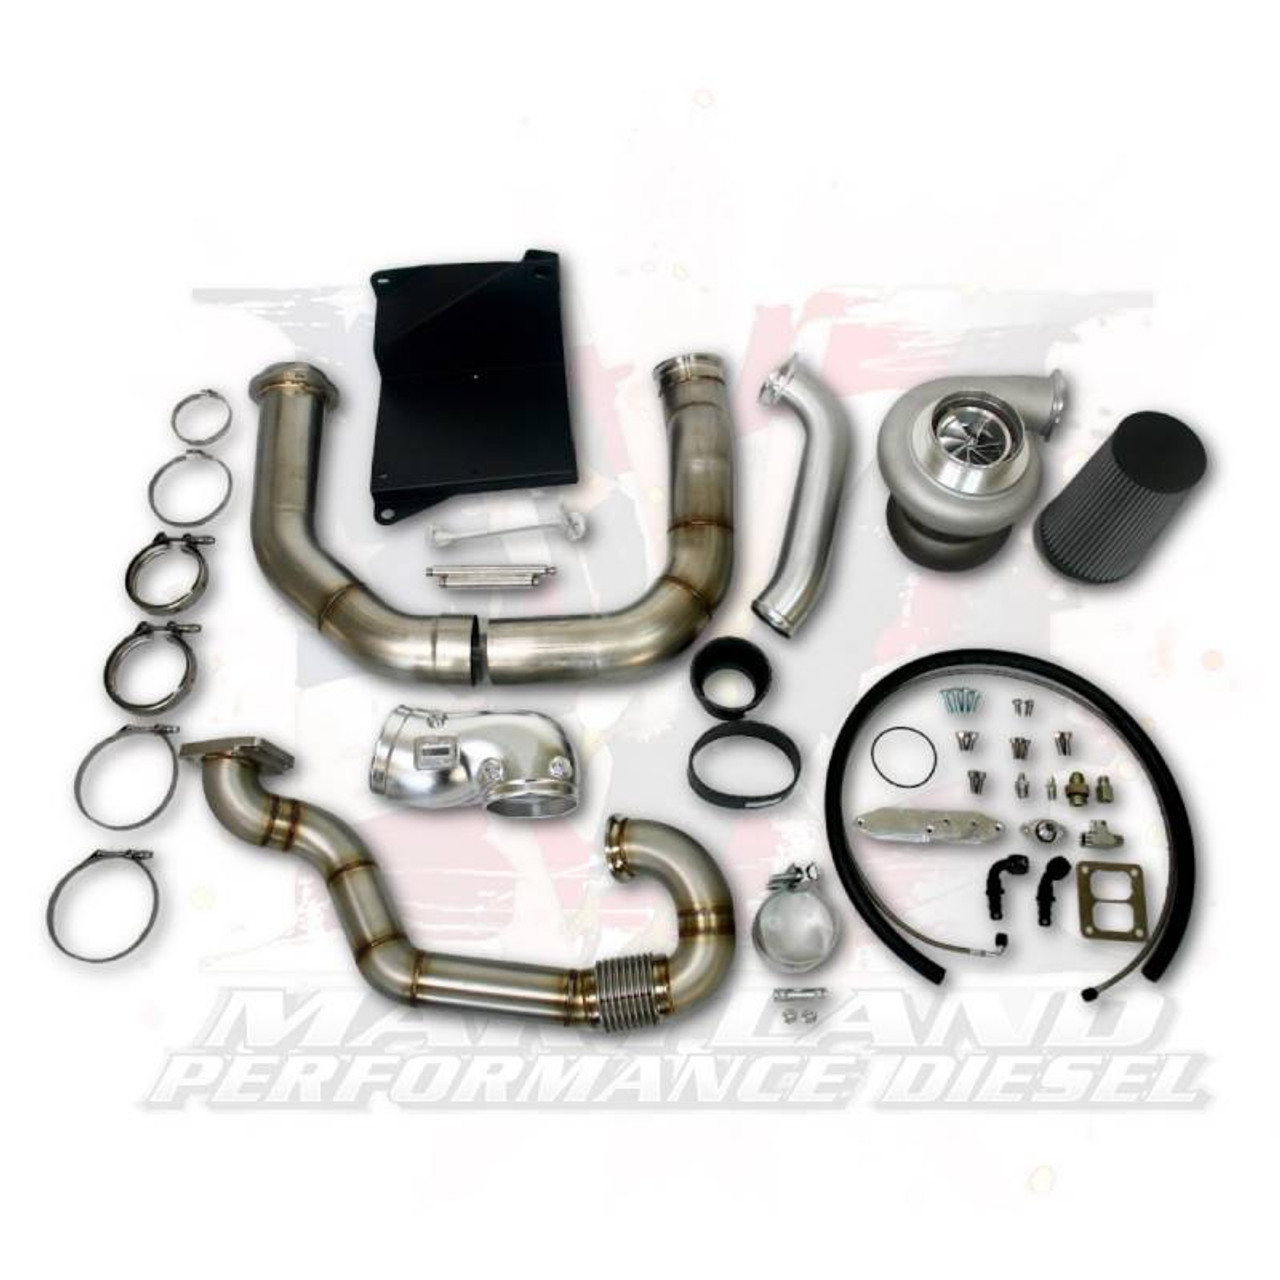 MPD Compound Kit for 2011 to 2014 Ford 6.7L Powerstroke (MPD-67-PSD-1114-CTK) Main View